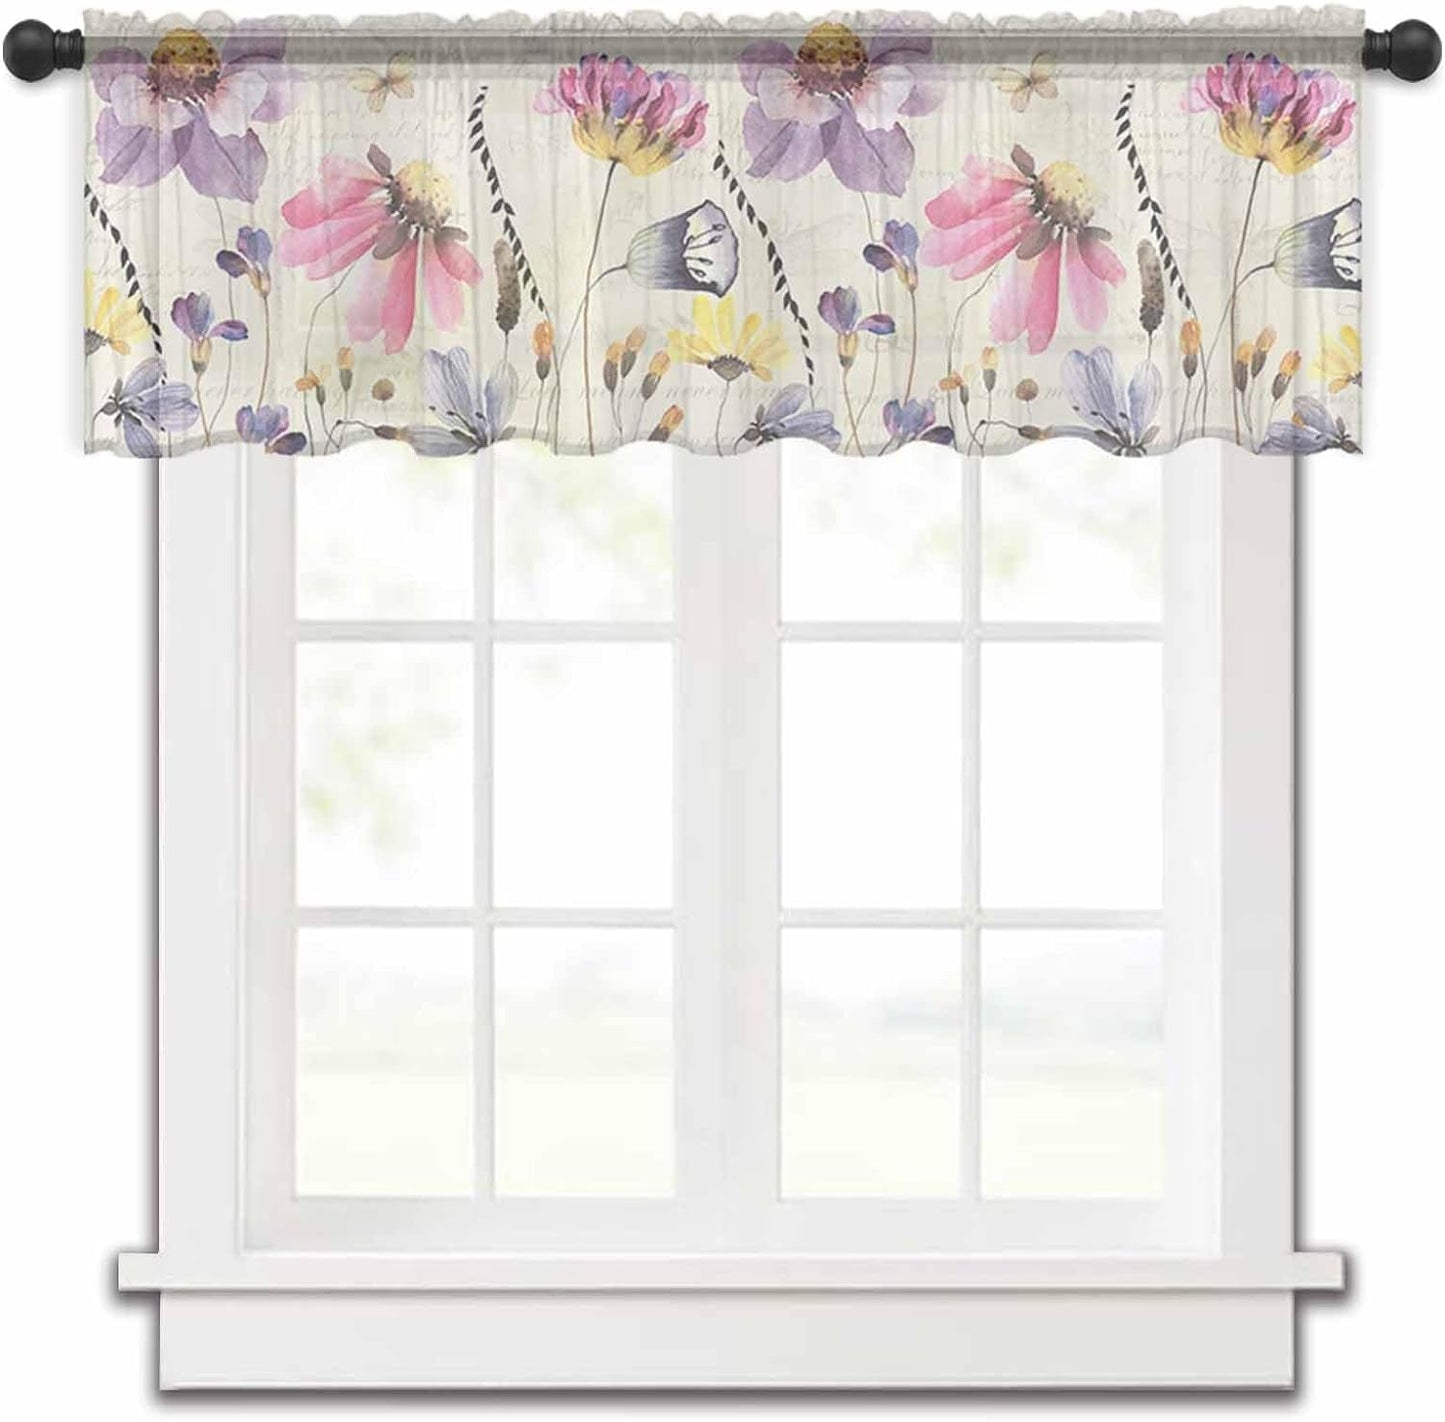 Pink Purple Floral Valance Curtains for Kitchen/Living Room/Bathroom/Bedroom Window,Rod Pocket Small Topper Half Short Window Curtains Voile Sheer Scarf, Vintage Country Botanical Watercolor 54"X18"